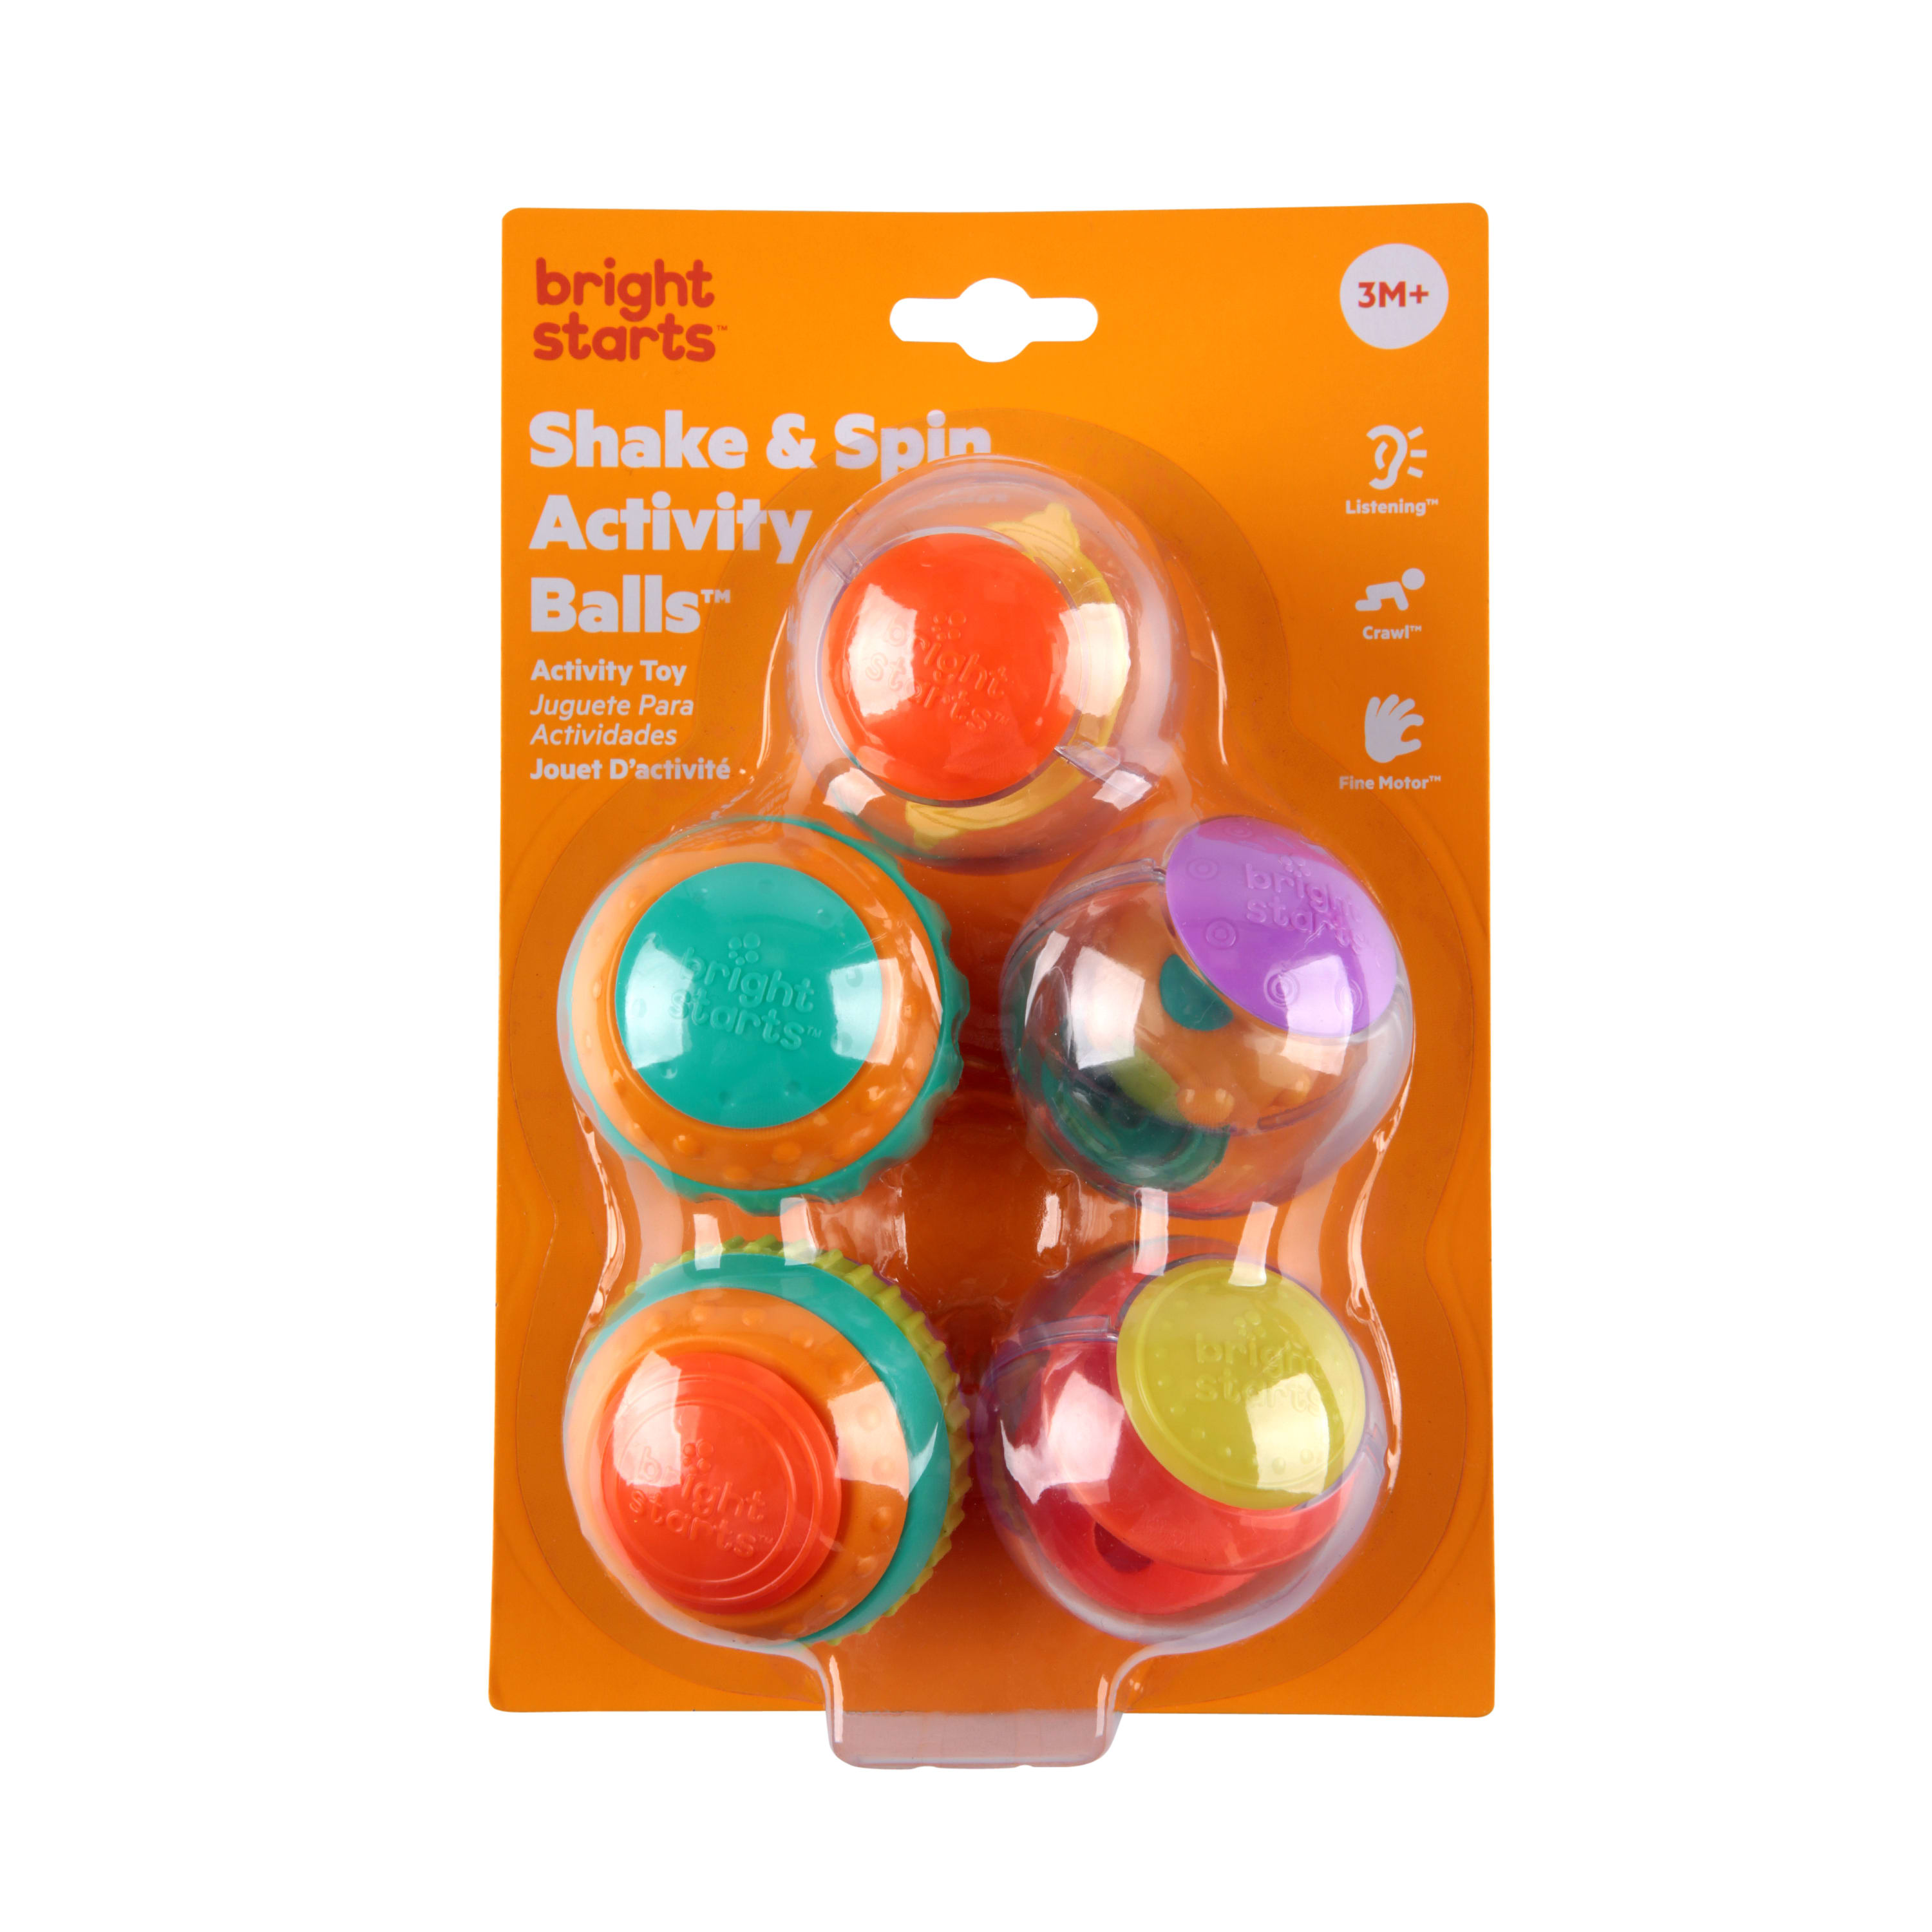 Bright Starts Shake & Spin Activity Balls Toy and Baby Rattle, Age 6 months + - image 3 of 7